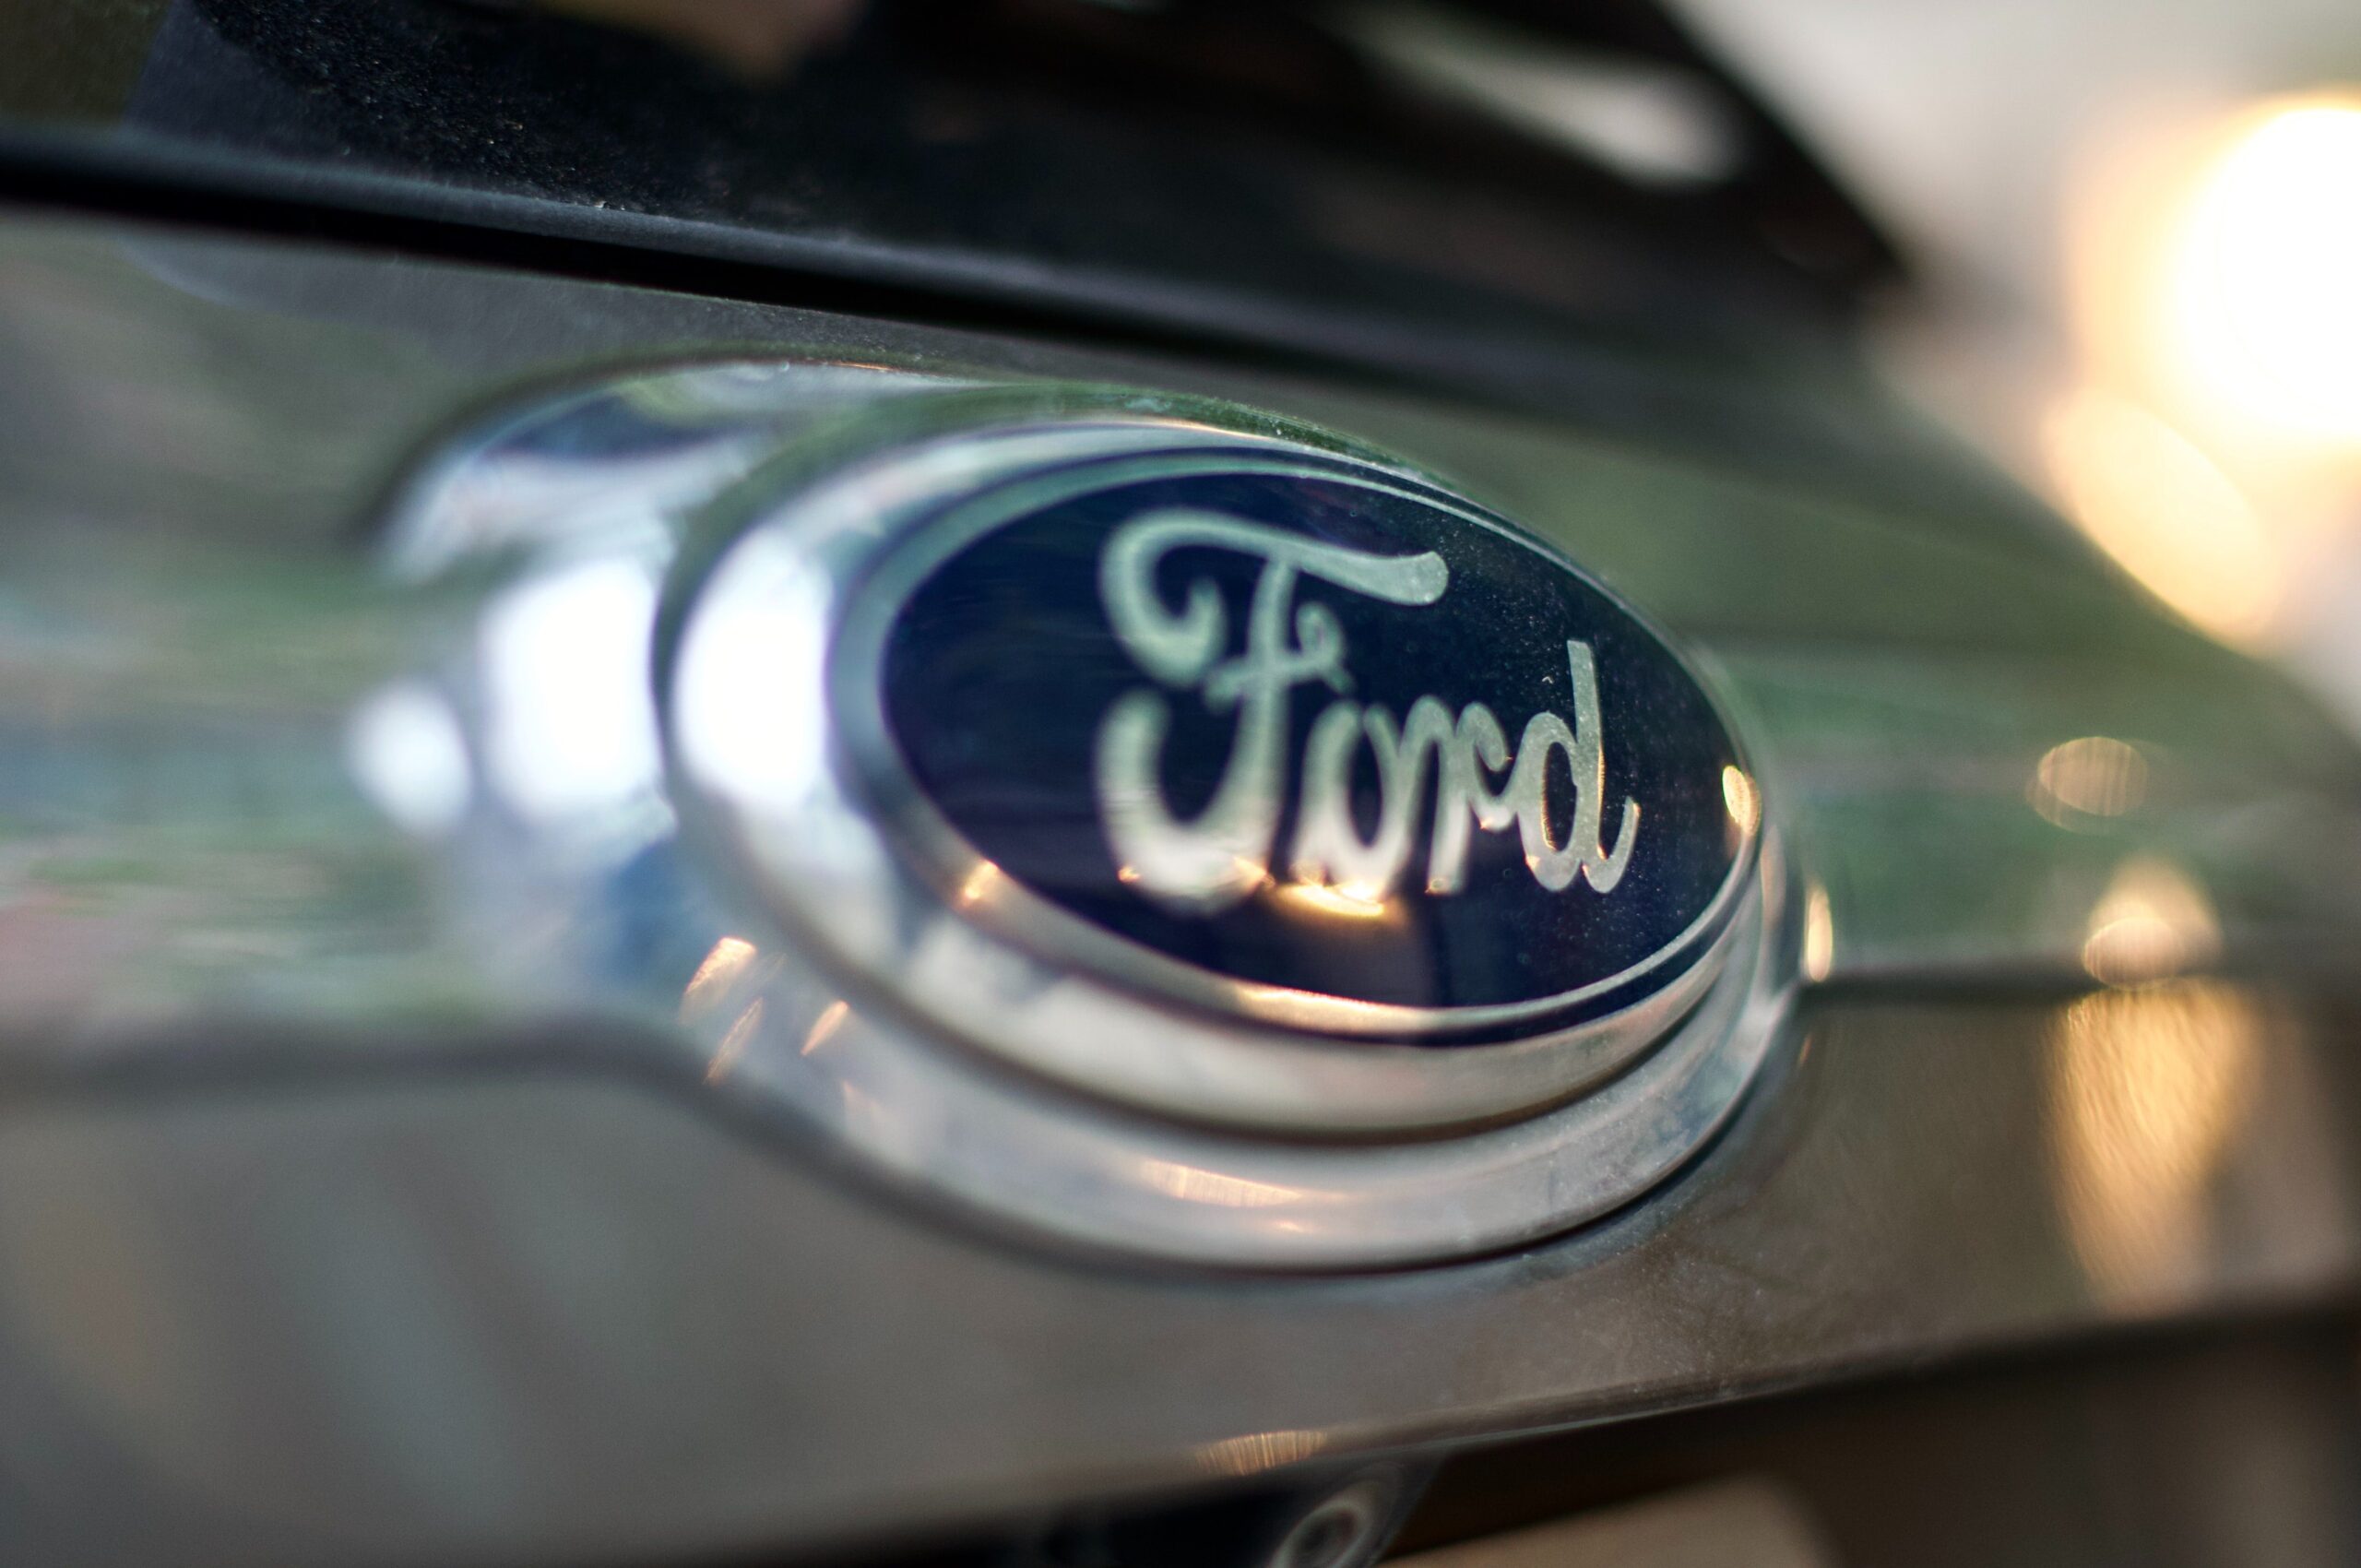 THE BIDEN EFFECT: Ford to Lose .5 Billion on Electric Vehicles This Year